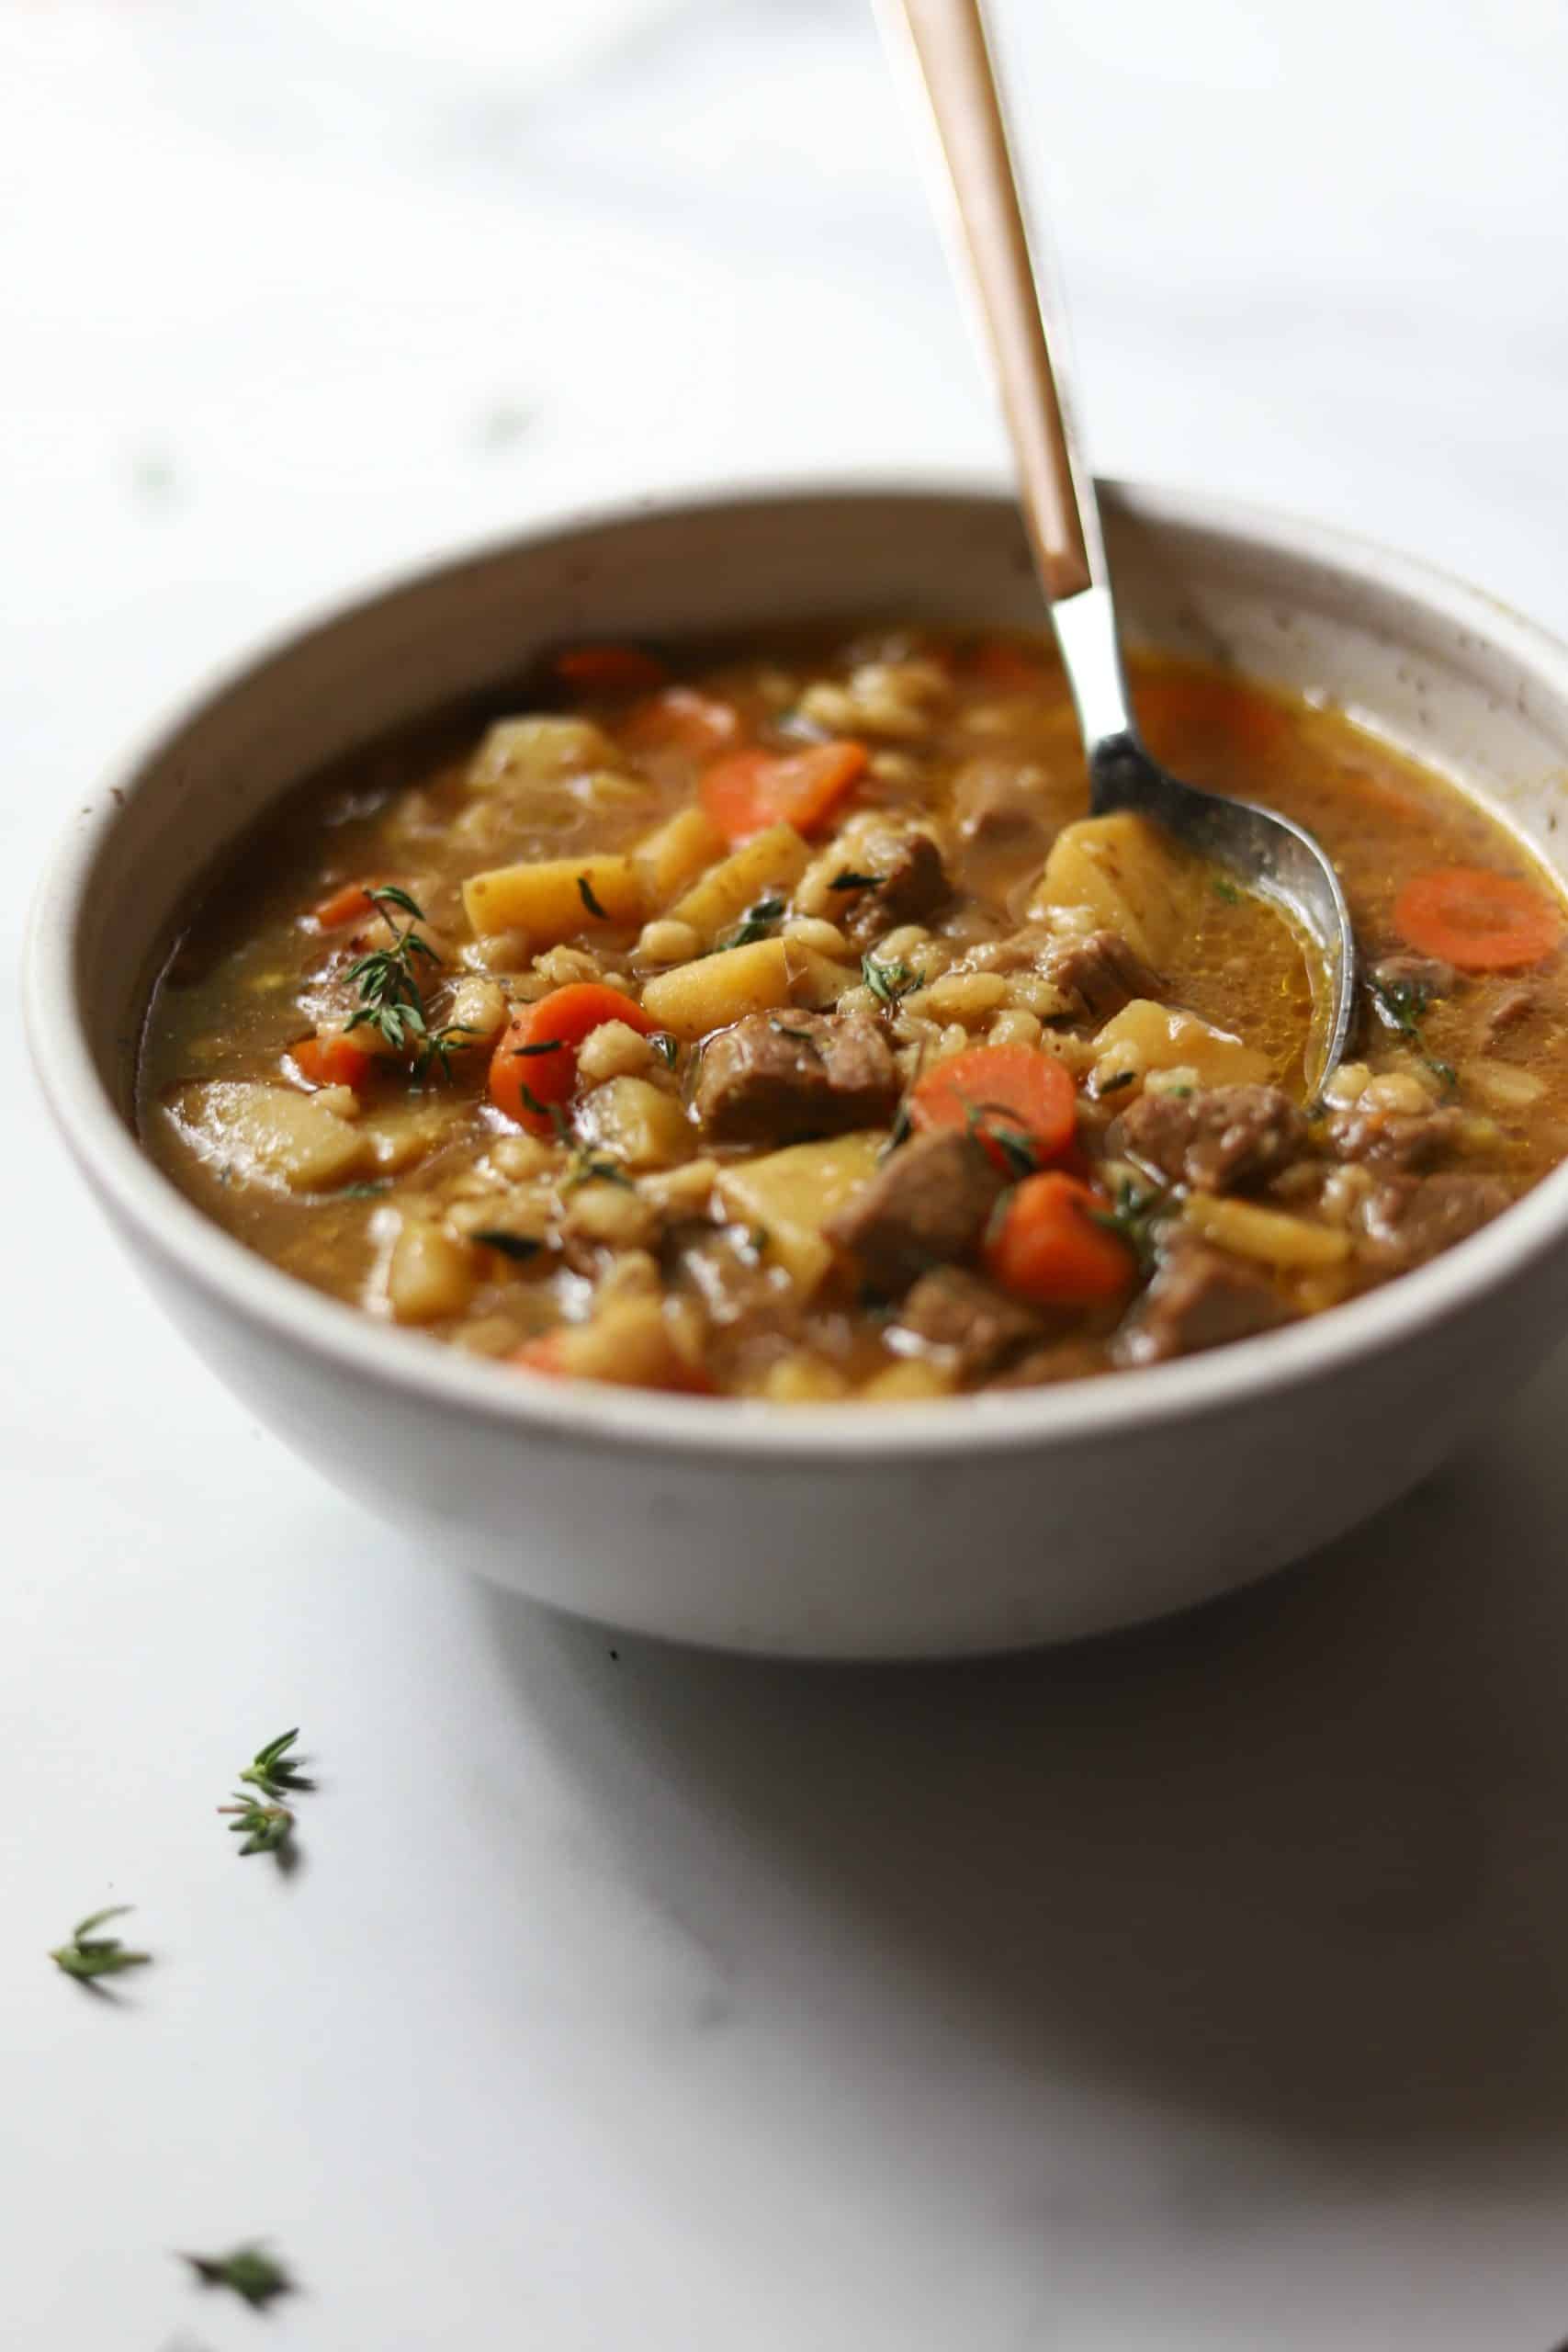 Beef barley soup in a white bowl